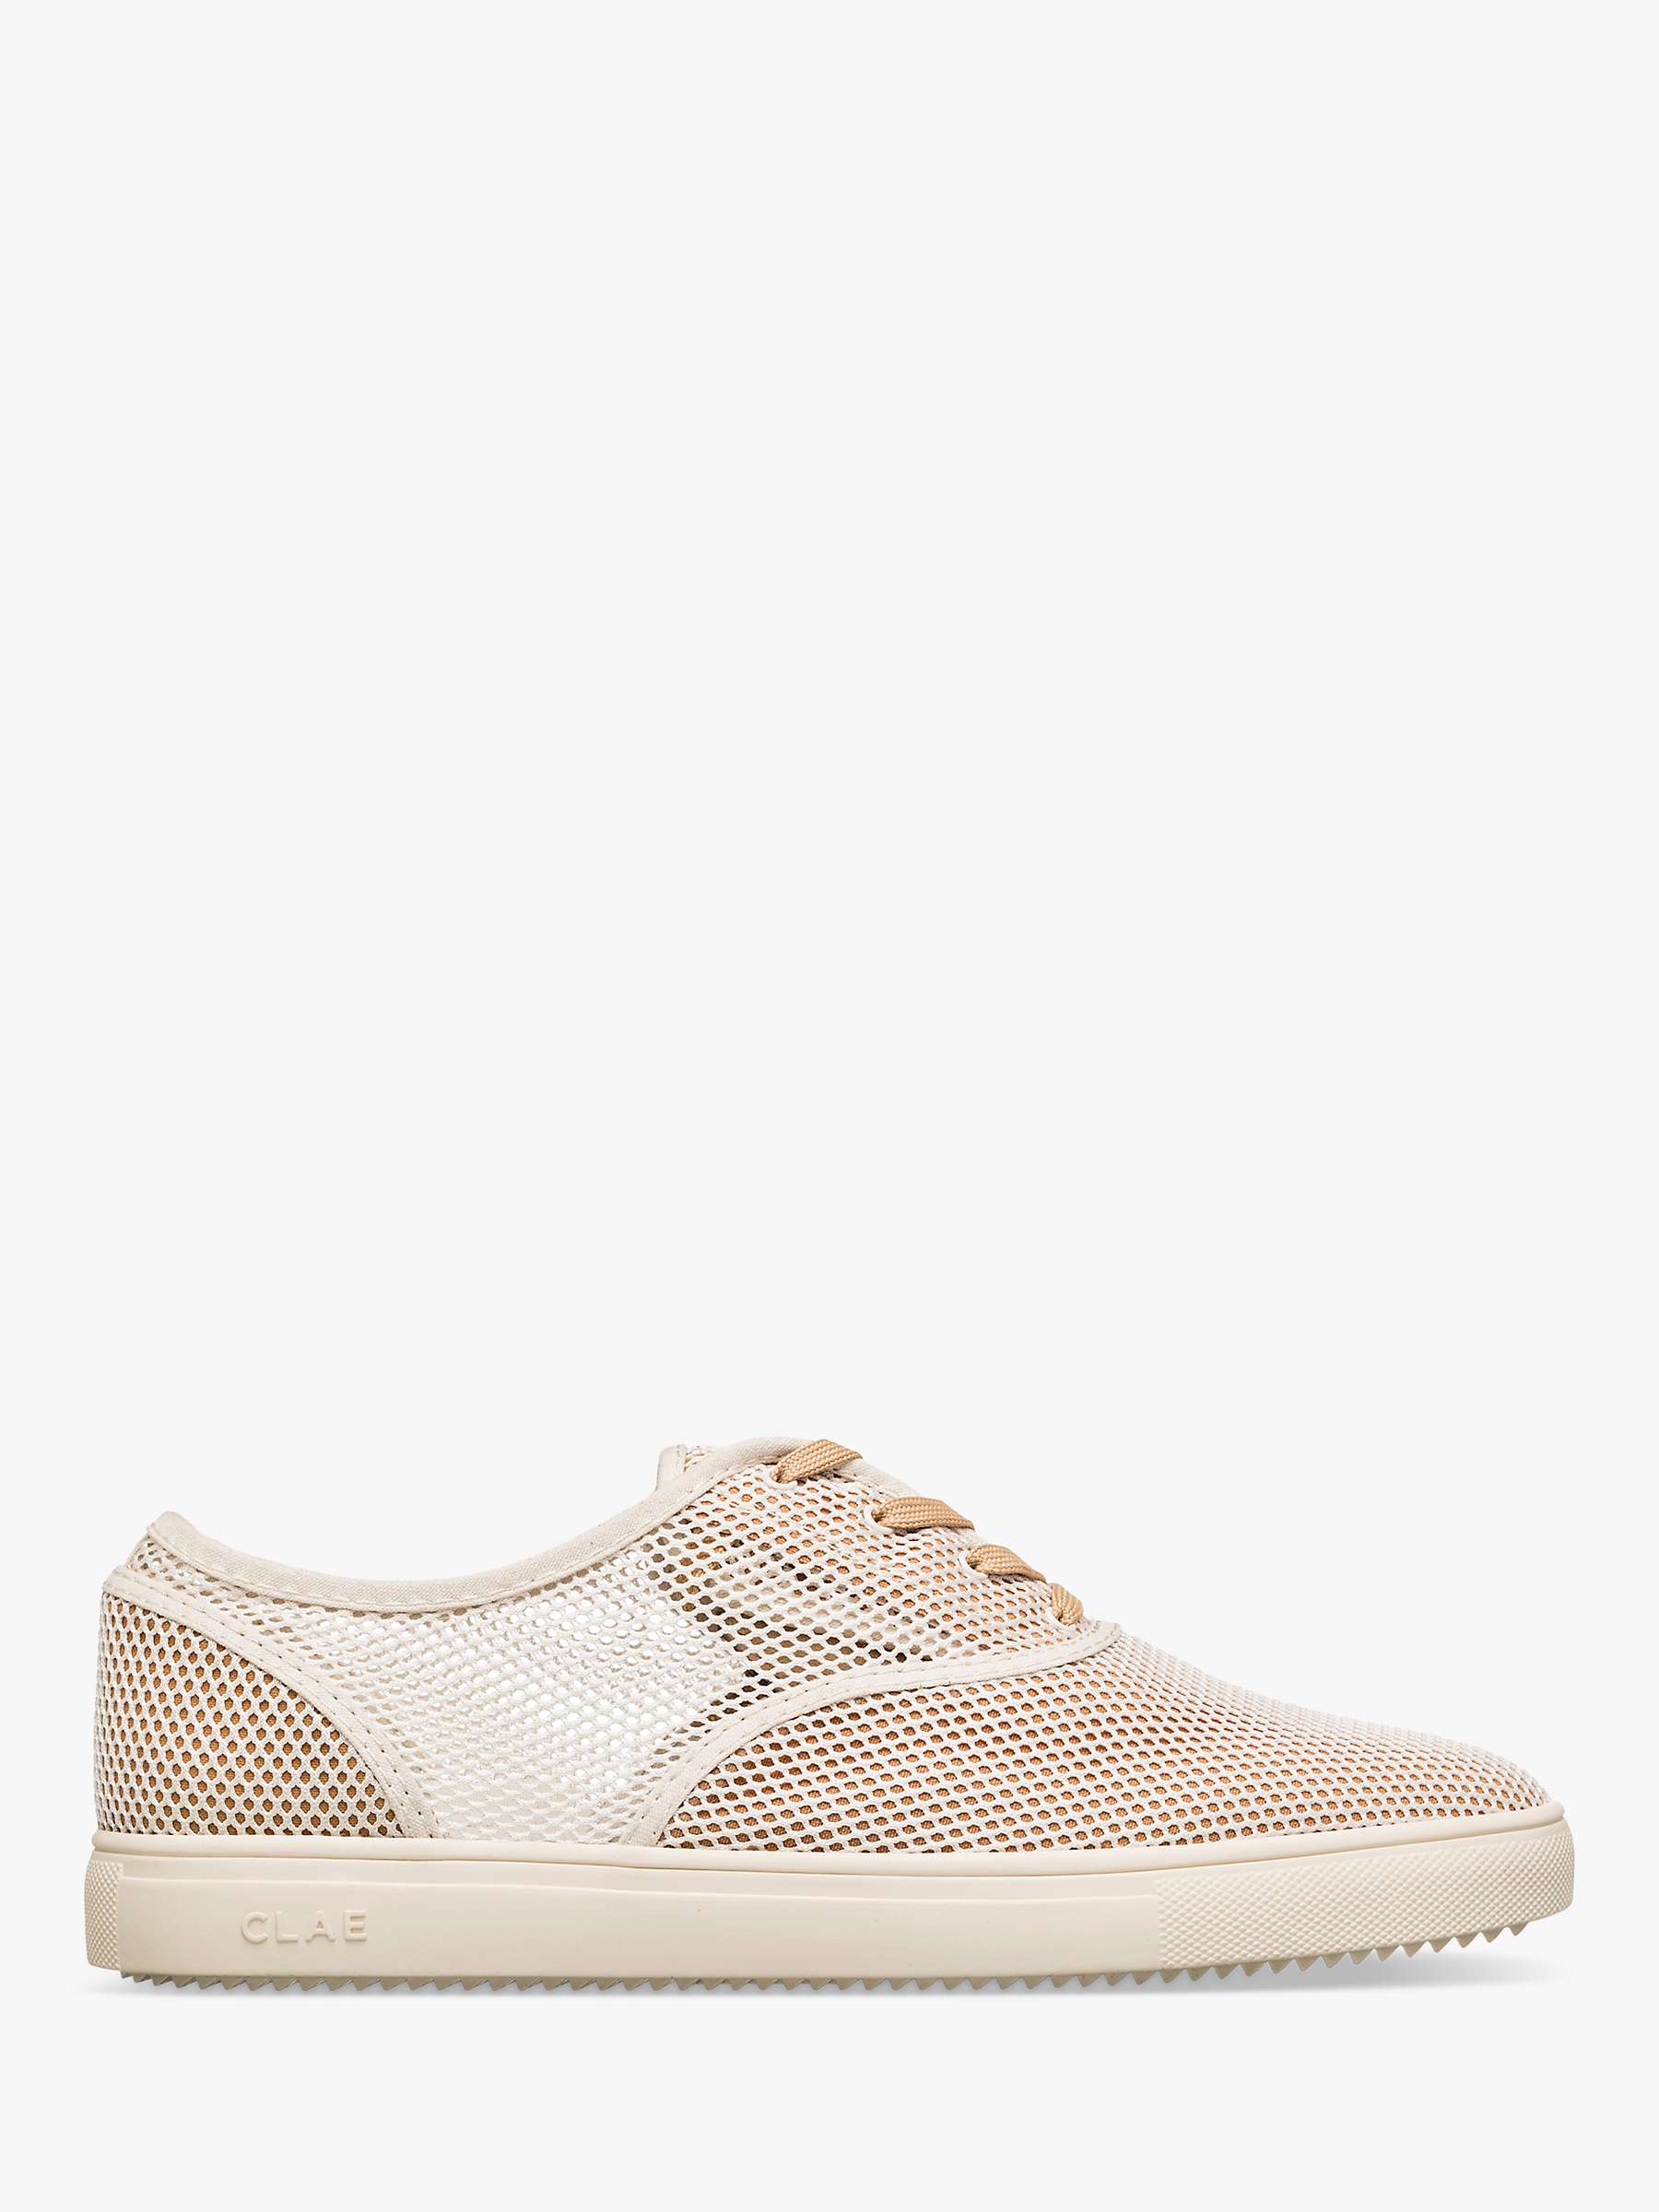 Buy CLAE Bruce Knit Trainers, Off White Online at johnlewis.com